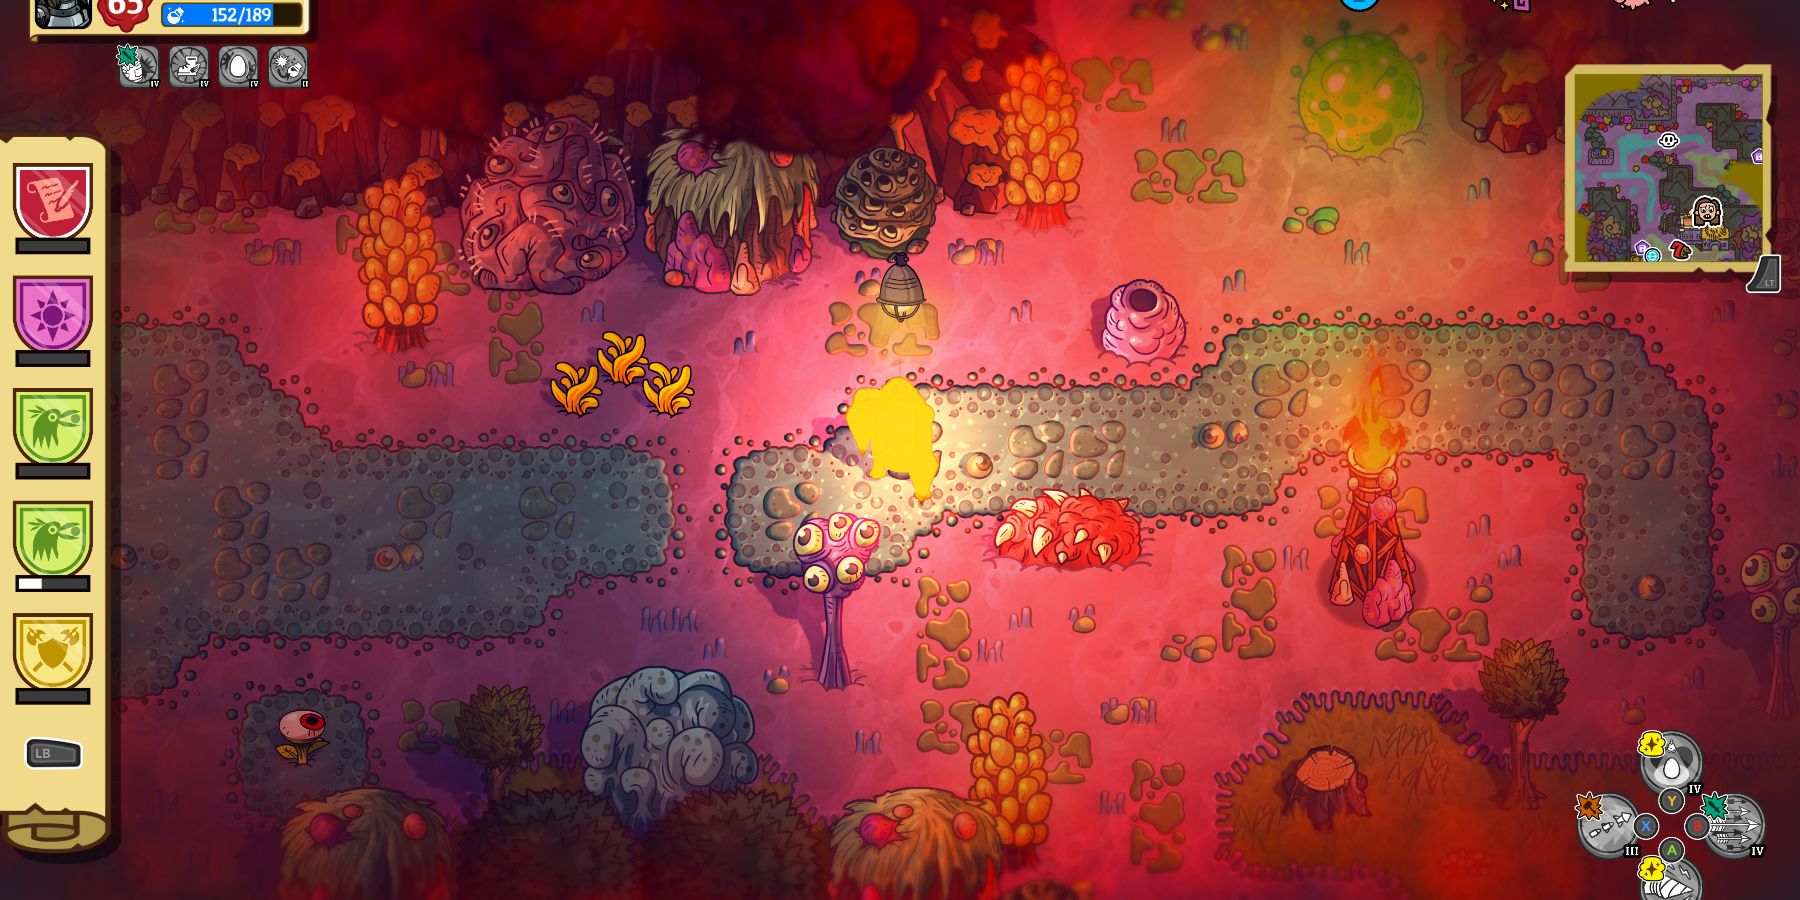 a glowing, yellow robot stands under a suspended incubator light. the surrounding environment is purplish and filled with mutated plants